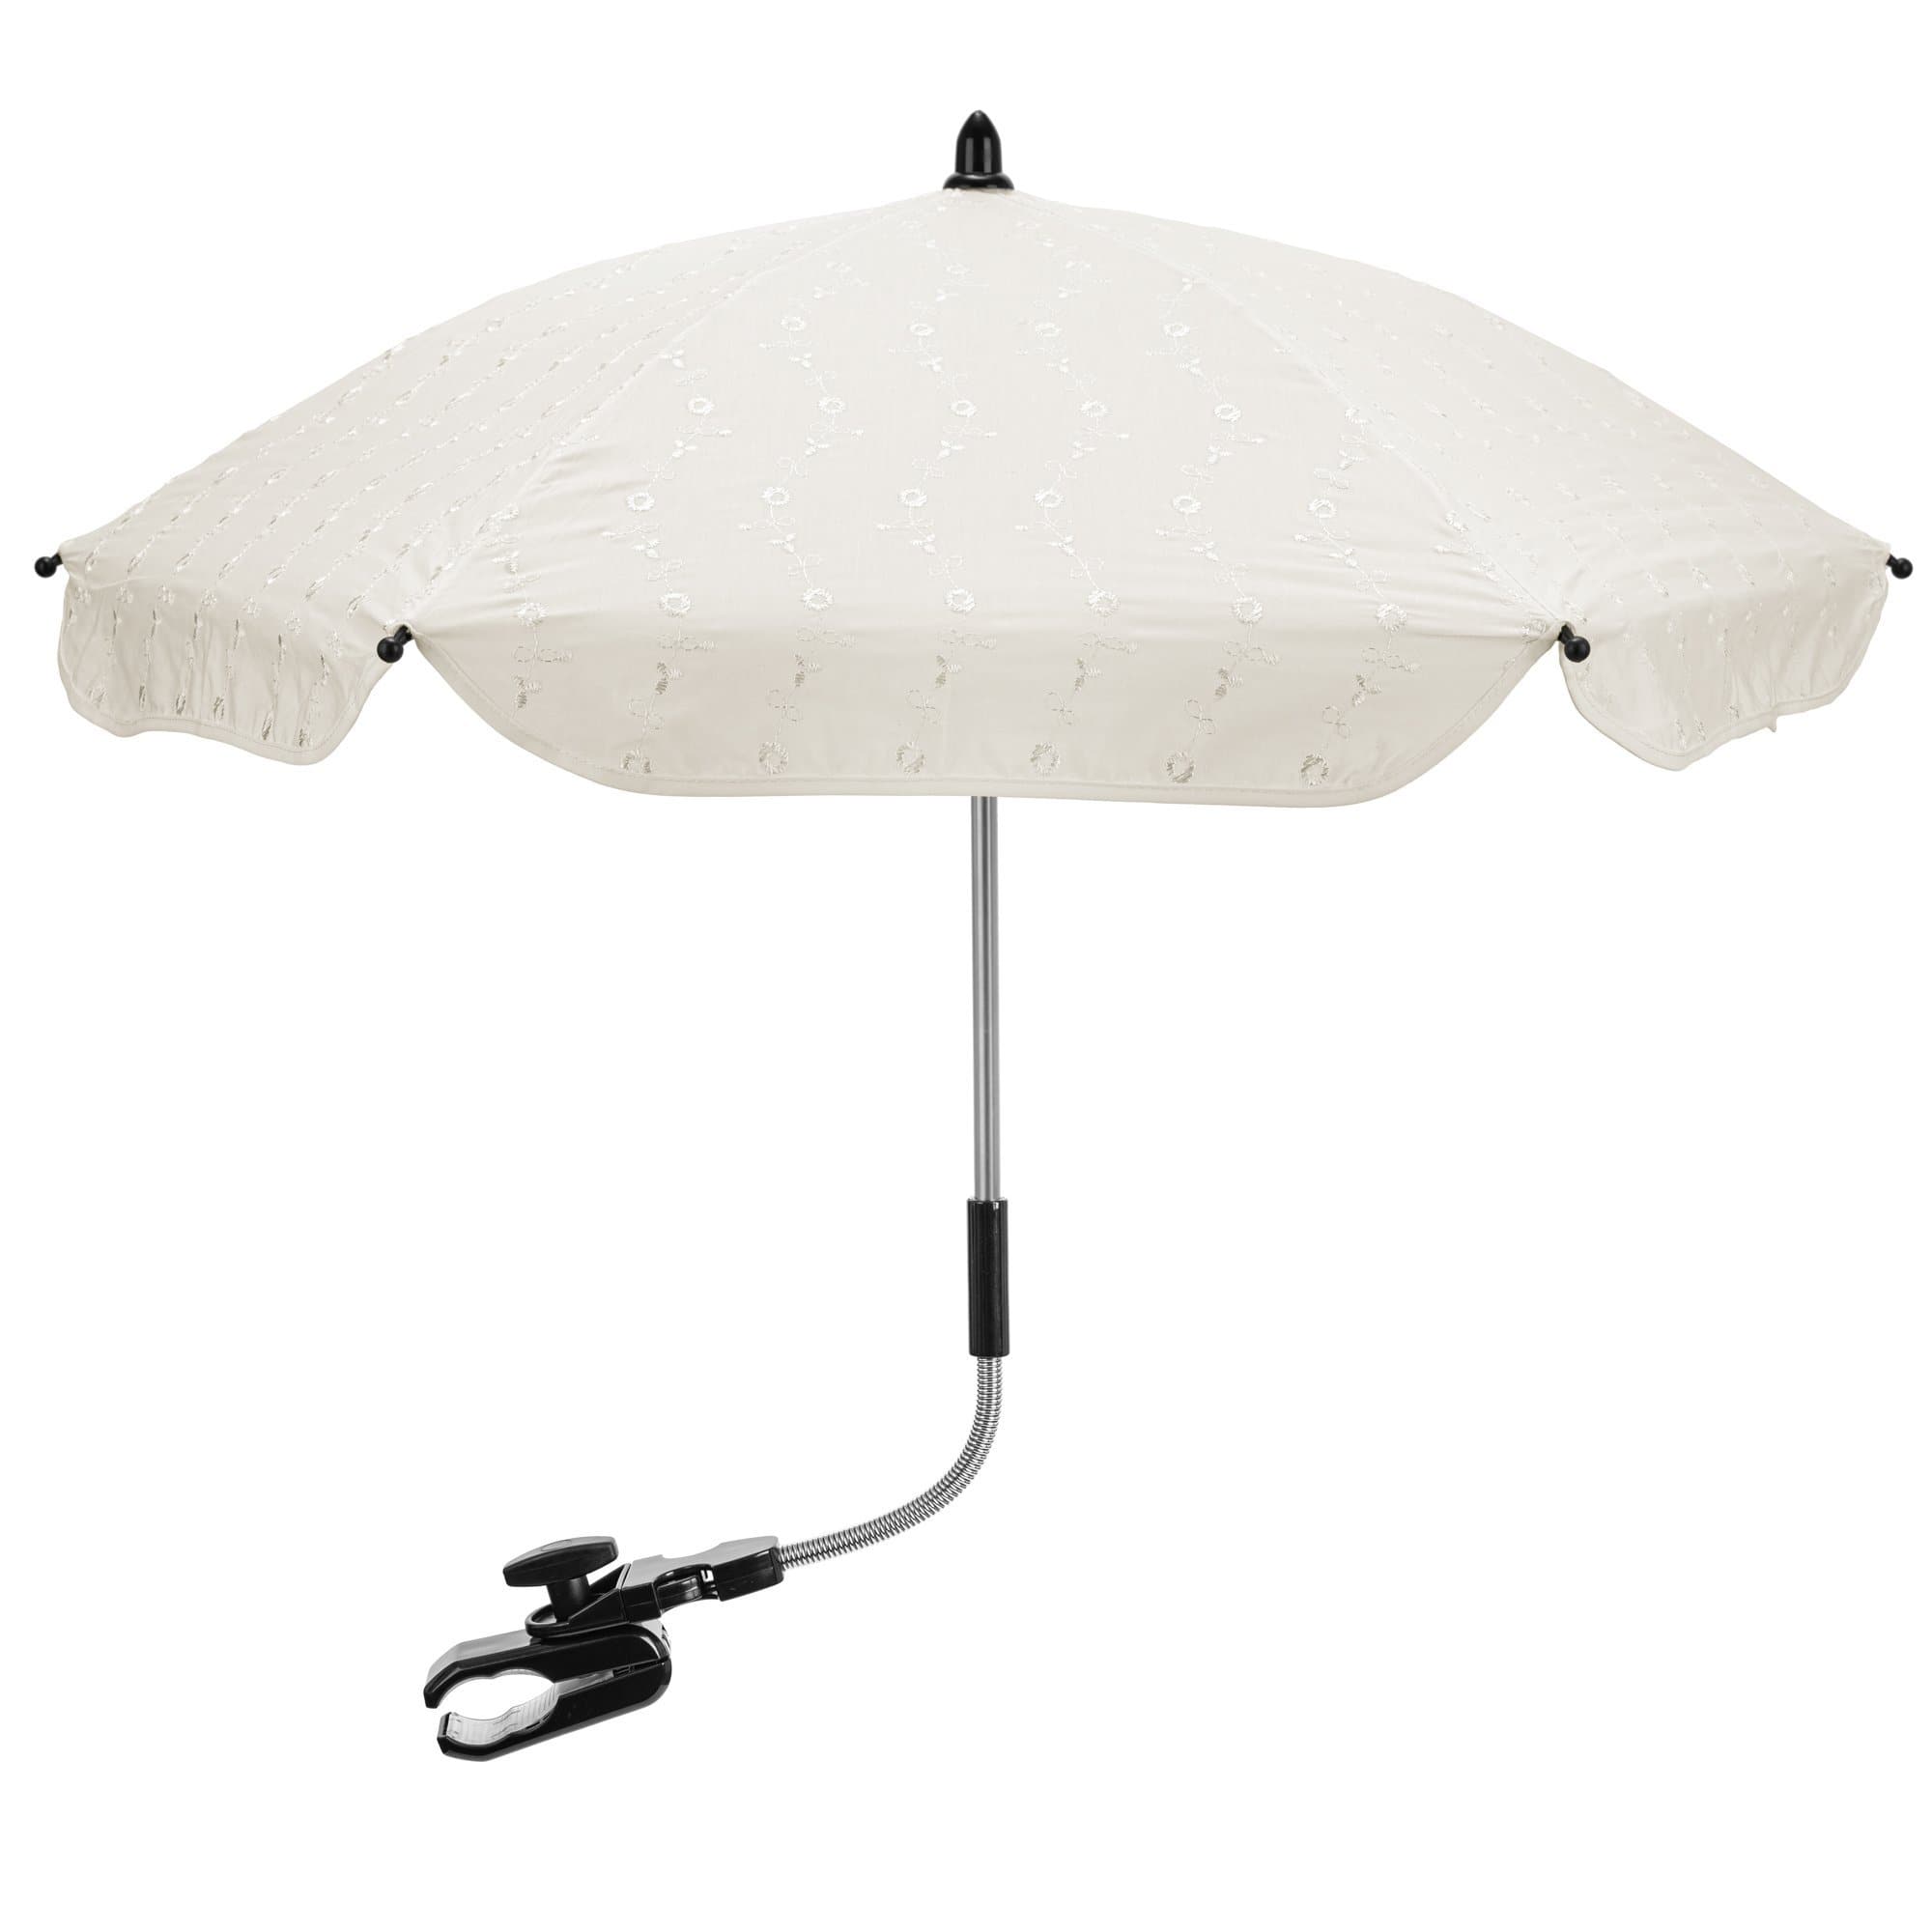 Broderie Anglaise Parasol Compatible with BabyDan - Cream / Fits All Models | For Your Little One